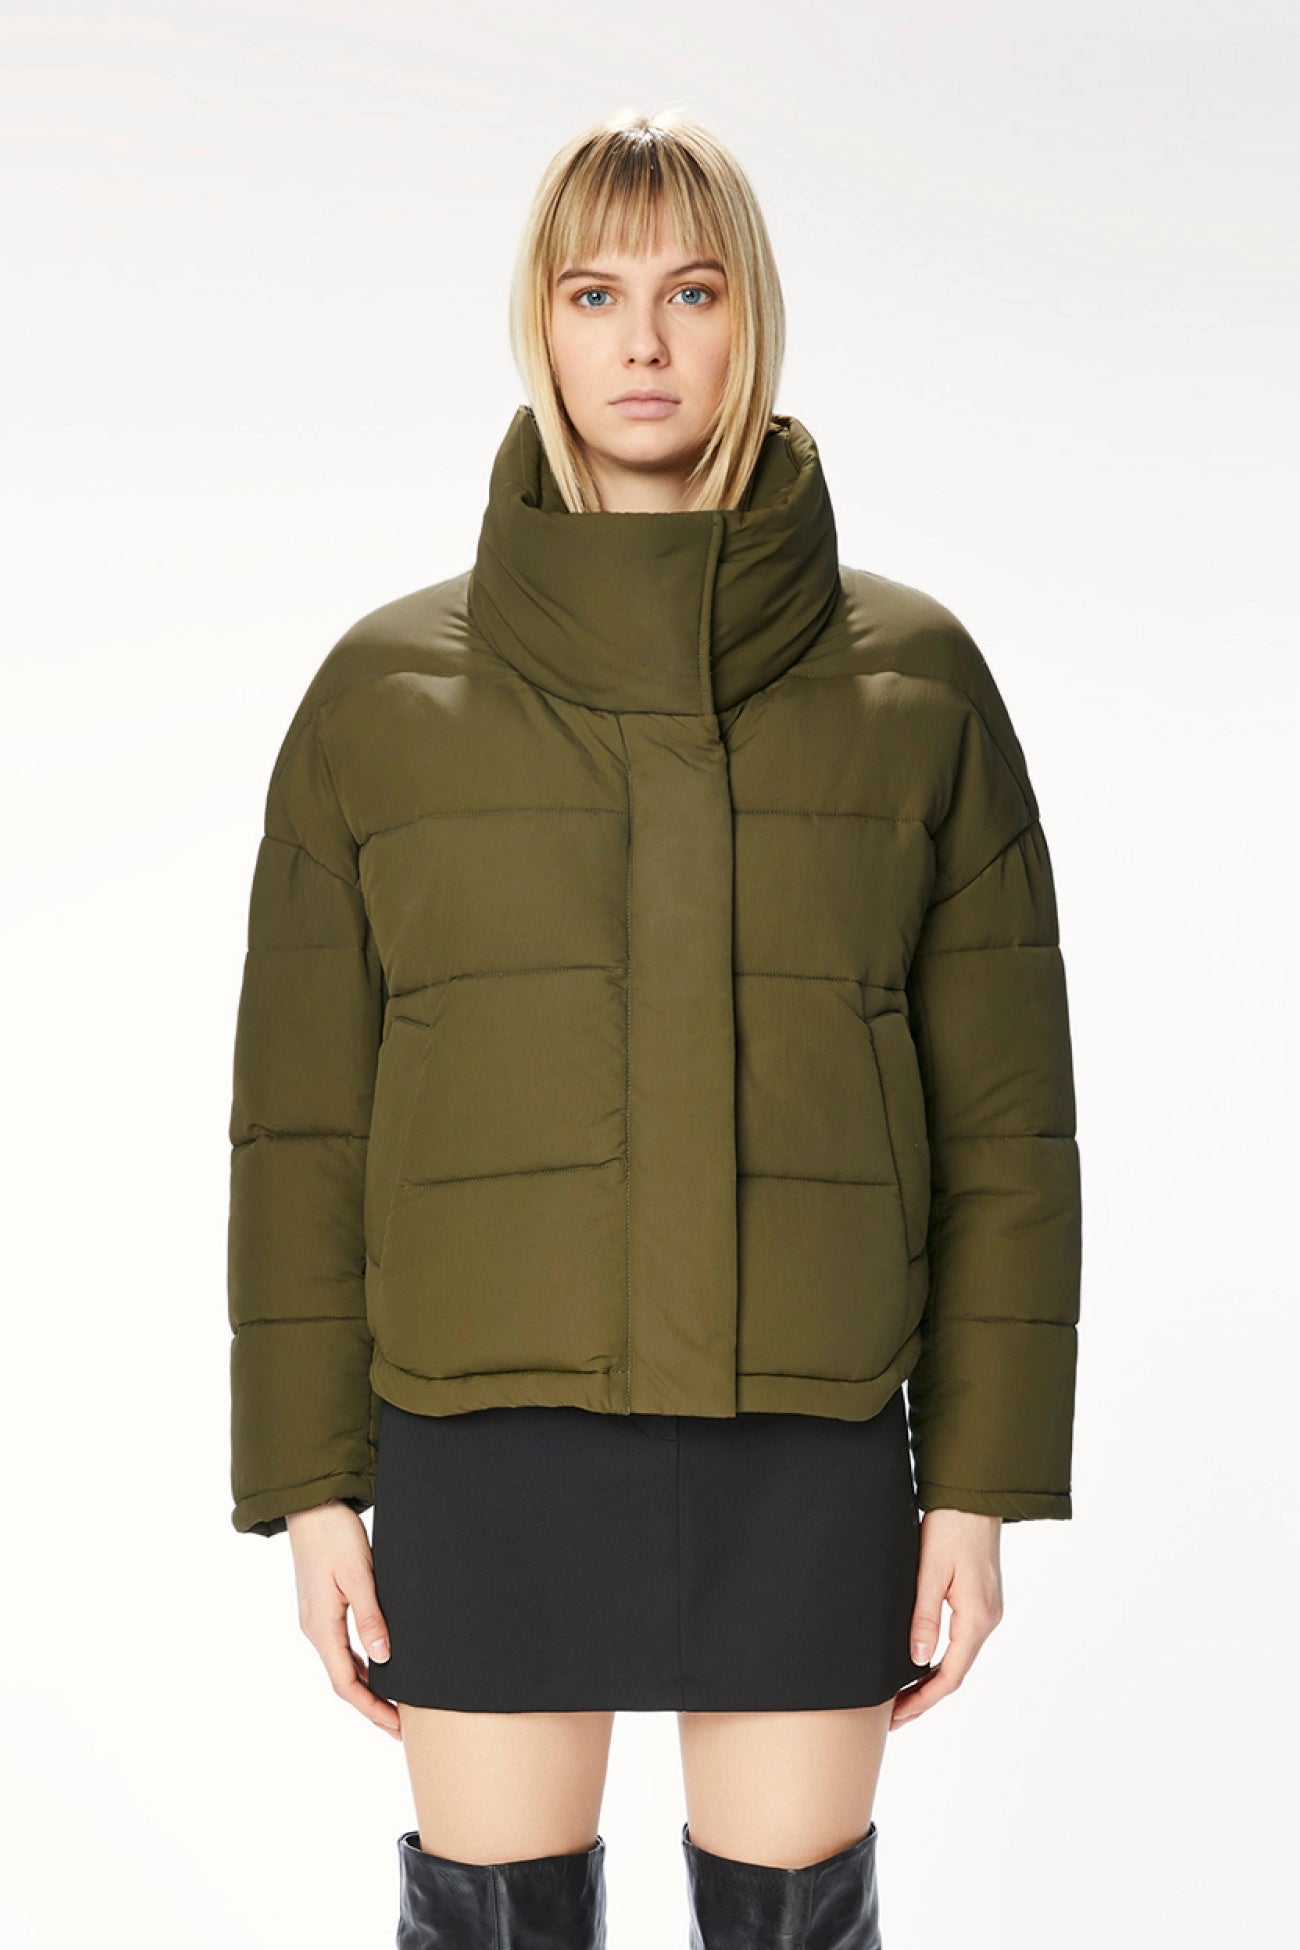 Quilted Short Park Jacket City Collective - The